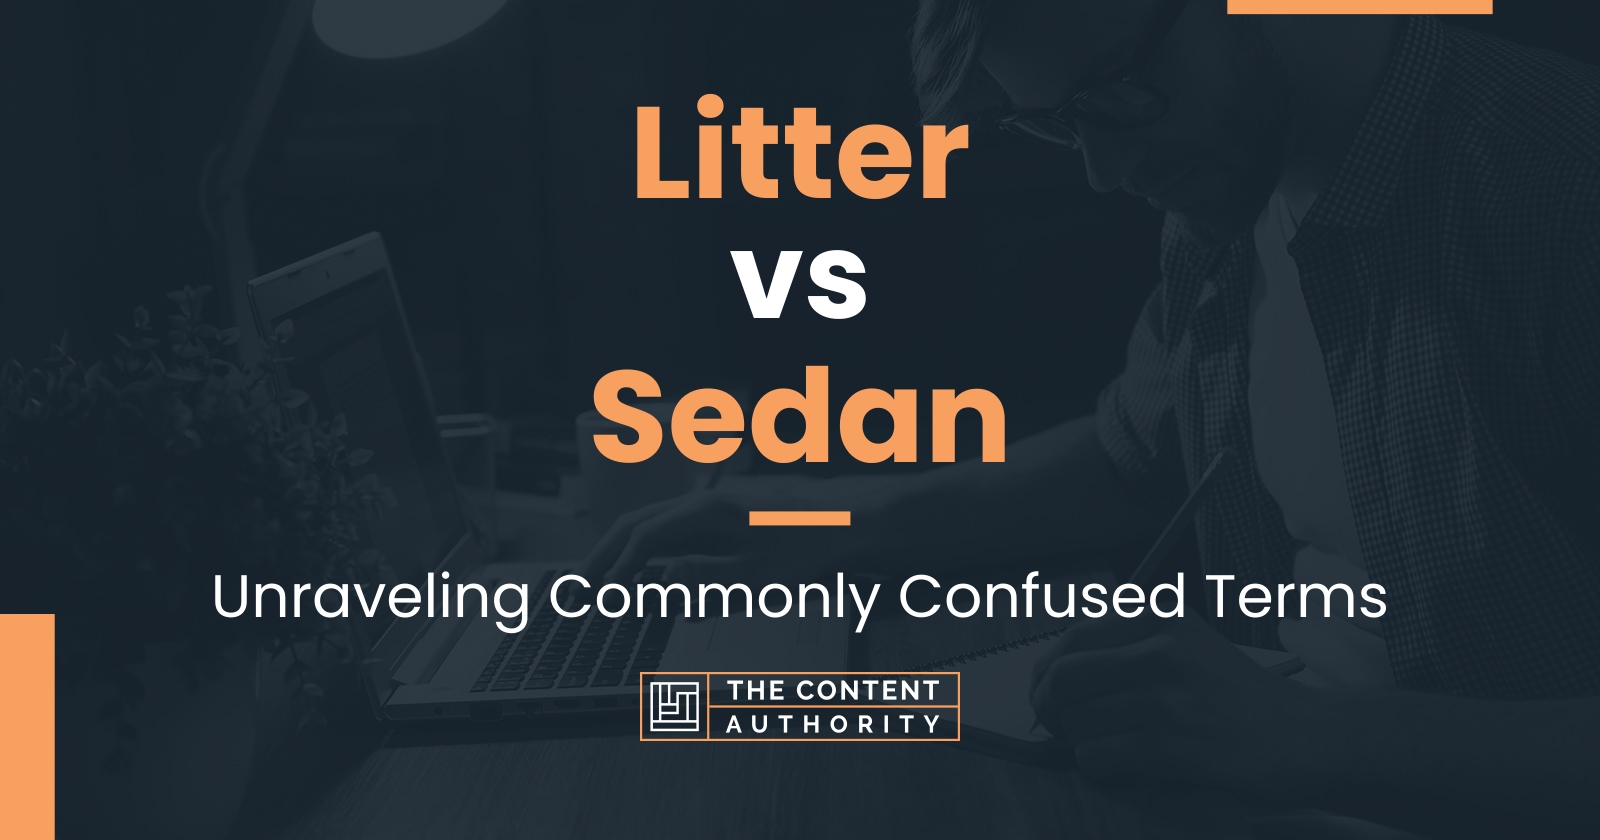 Litter vs Sedan: Unraveling Commonly Confused Terms